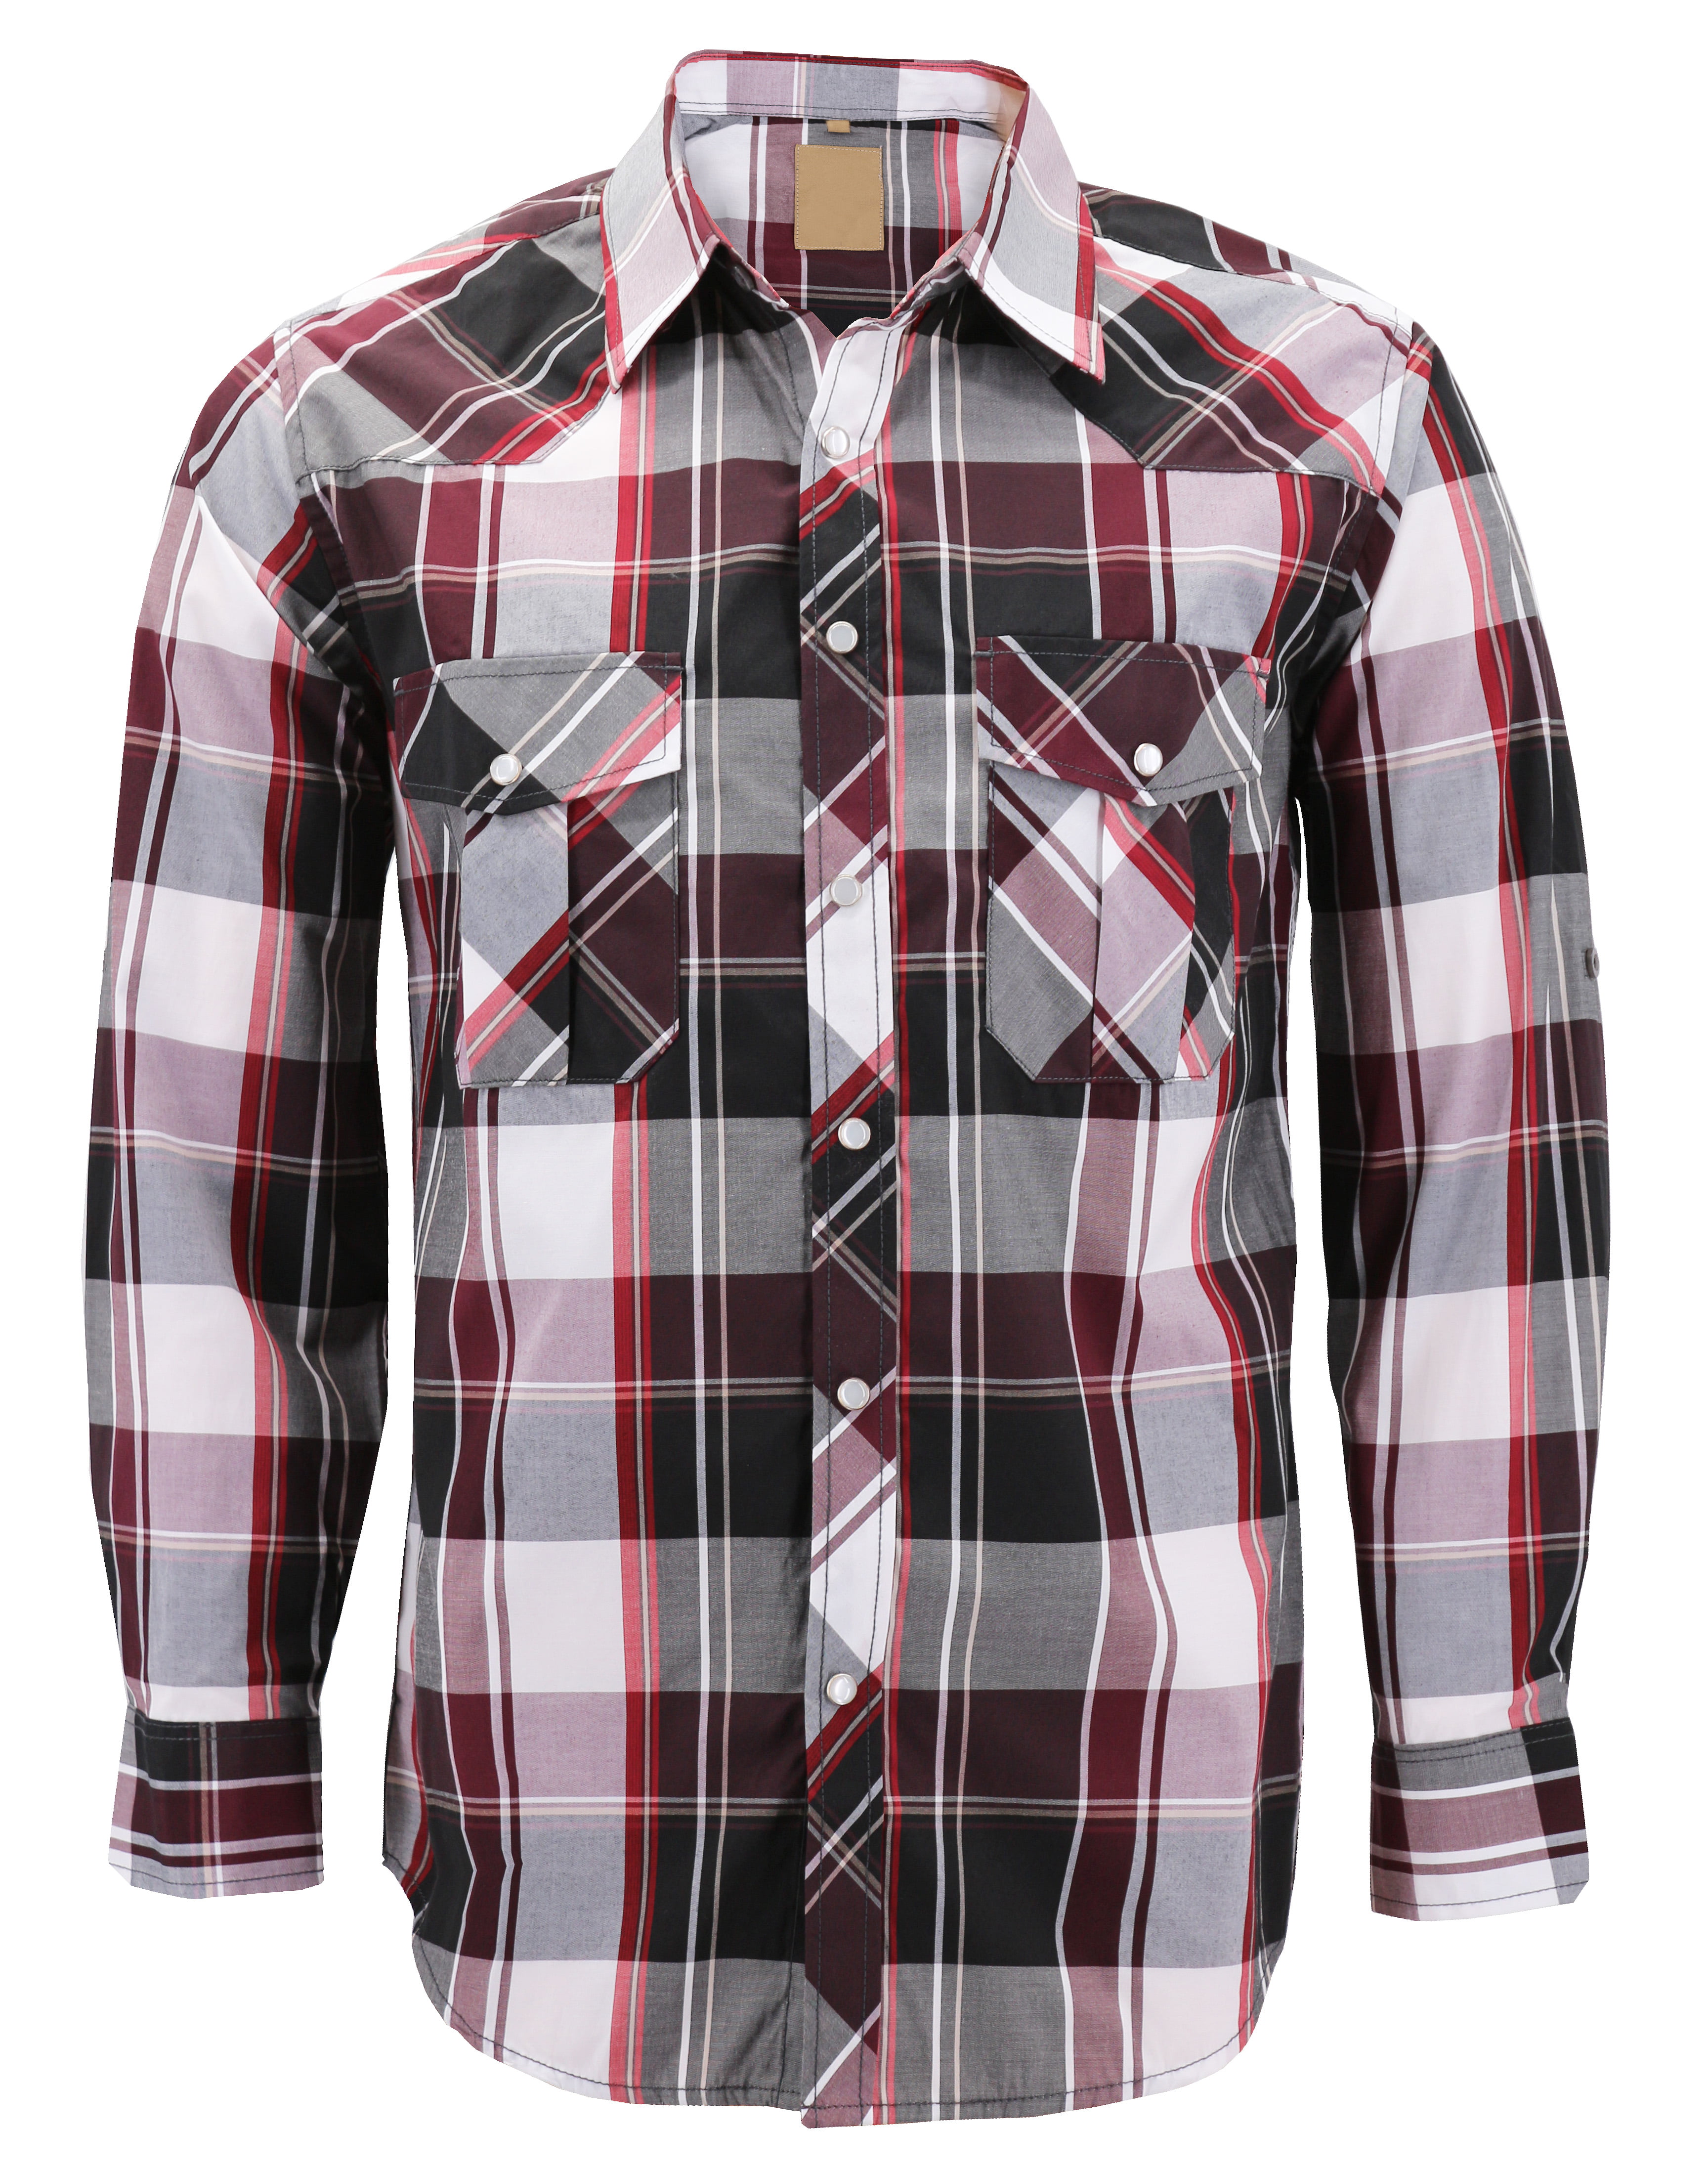 VKWEAR - Men’s Western Pearl Snap Button Down Casual Long Sleeve Plaid